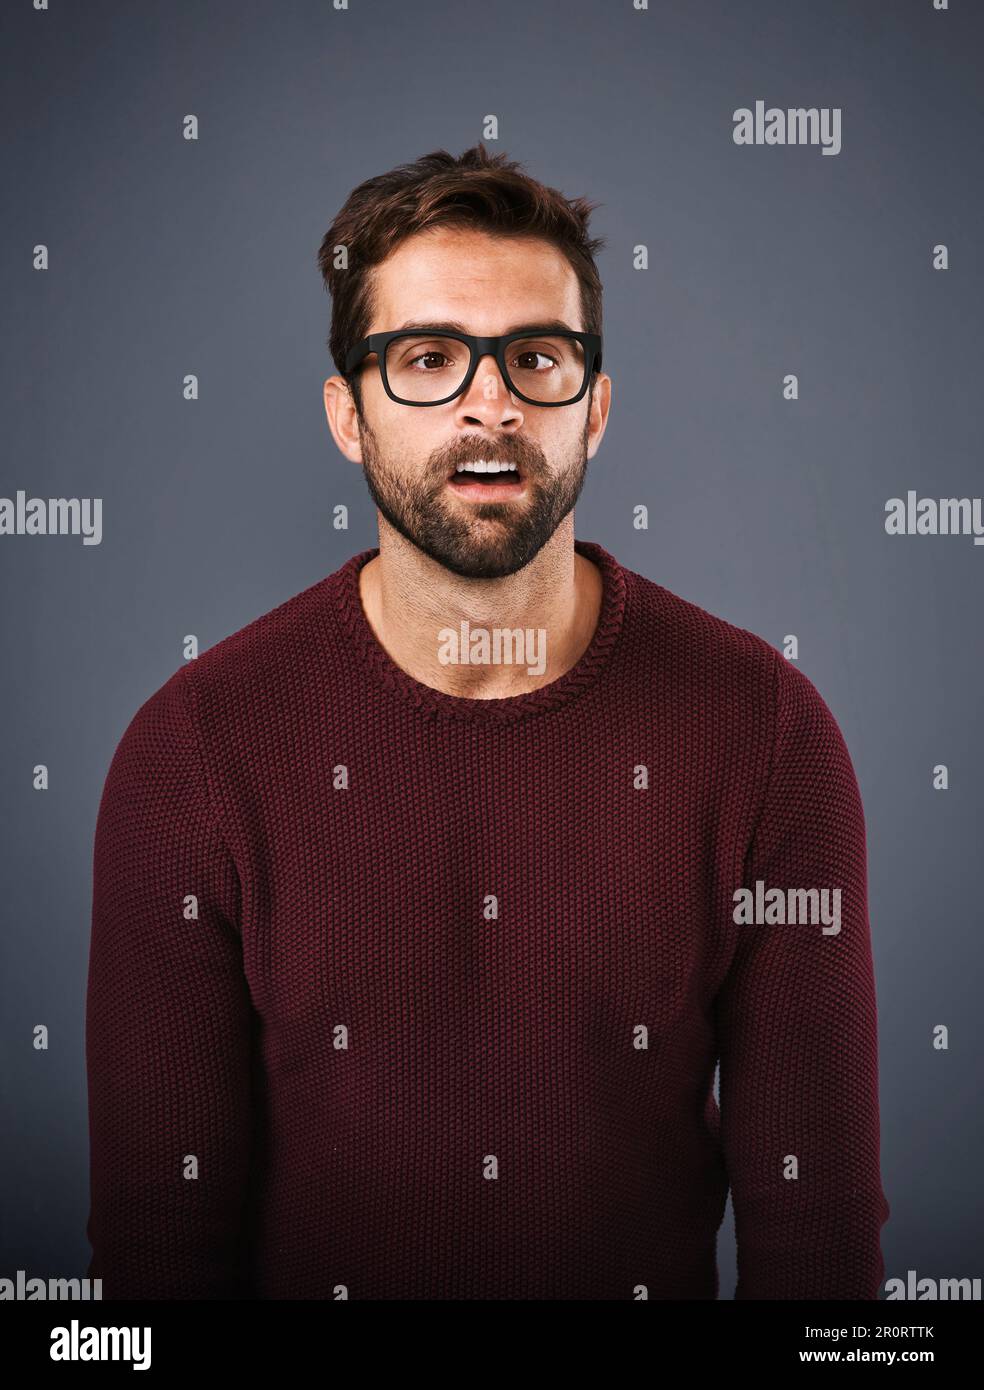 Messing around. Studio shot of a handsome young man pulling funny faces against a gray background. Stock Photo